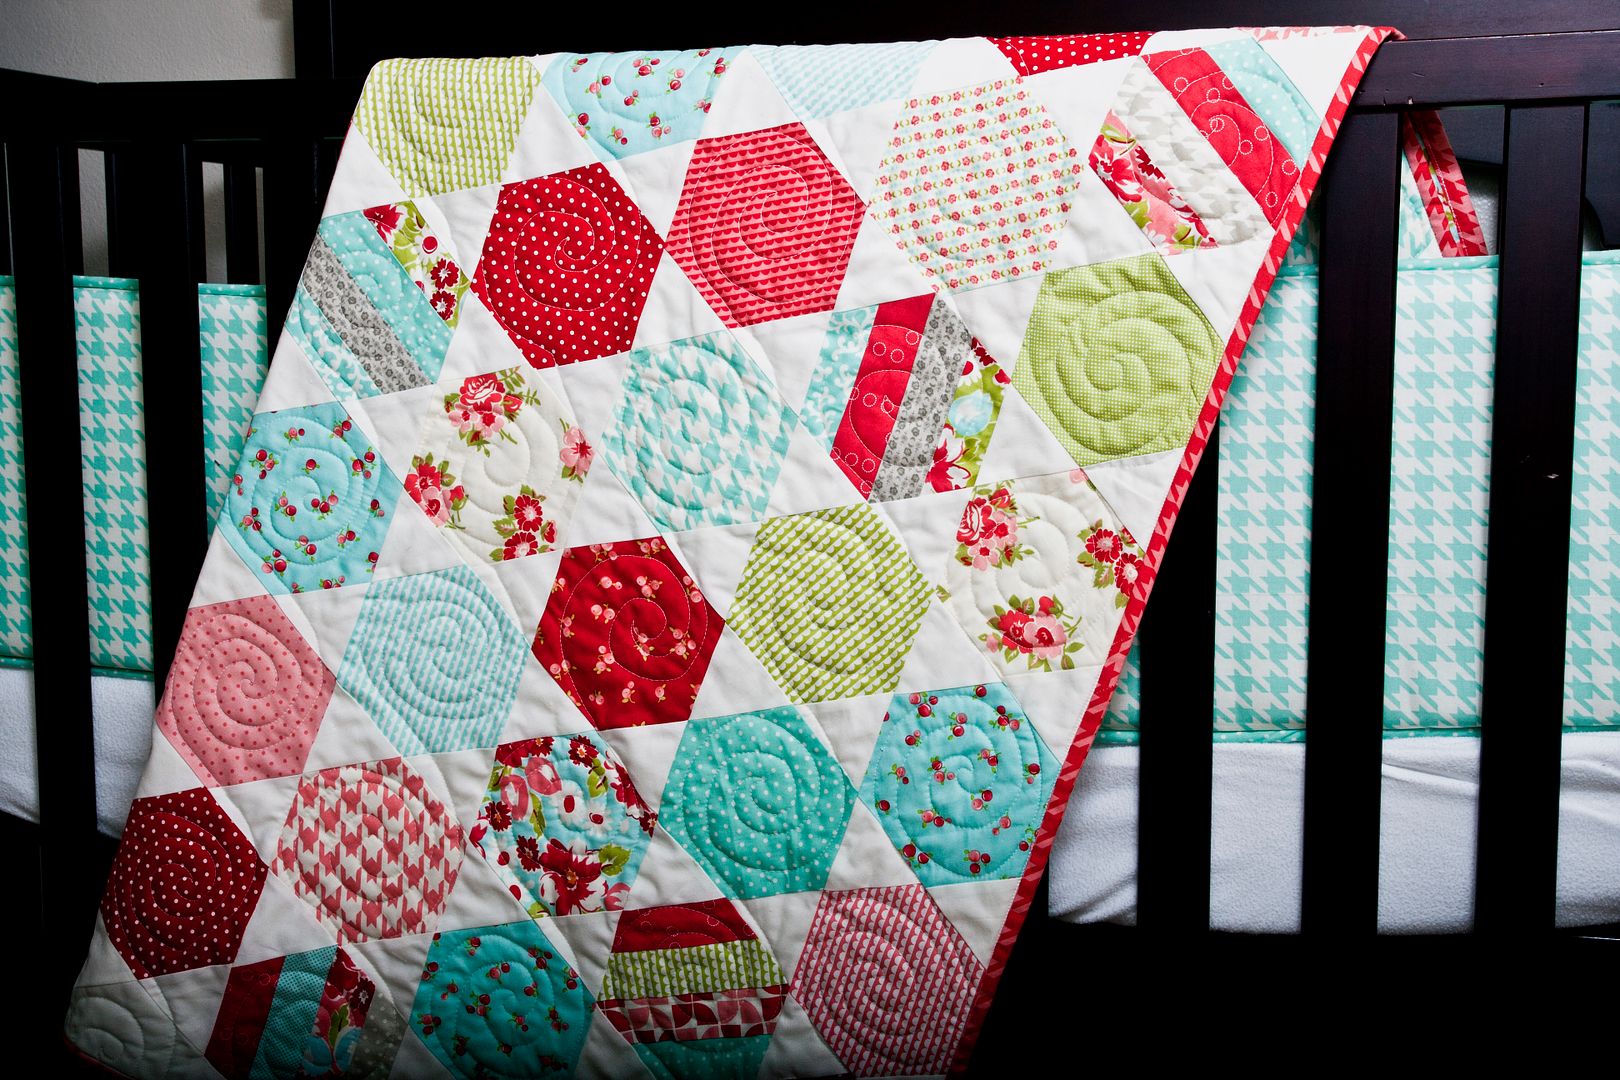 Juggle hexagon quilt PDF pattern by Thimble Blossoms. Makes a sweet baby quilt in these Ruby fabric by Bonnie & Camille for Moda Fabrics.